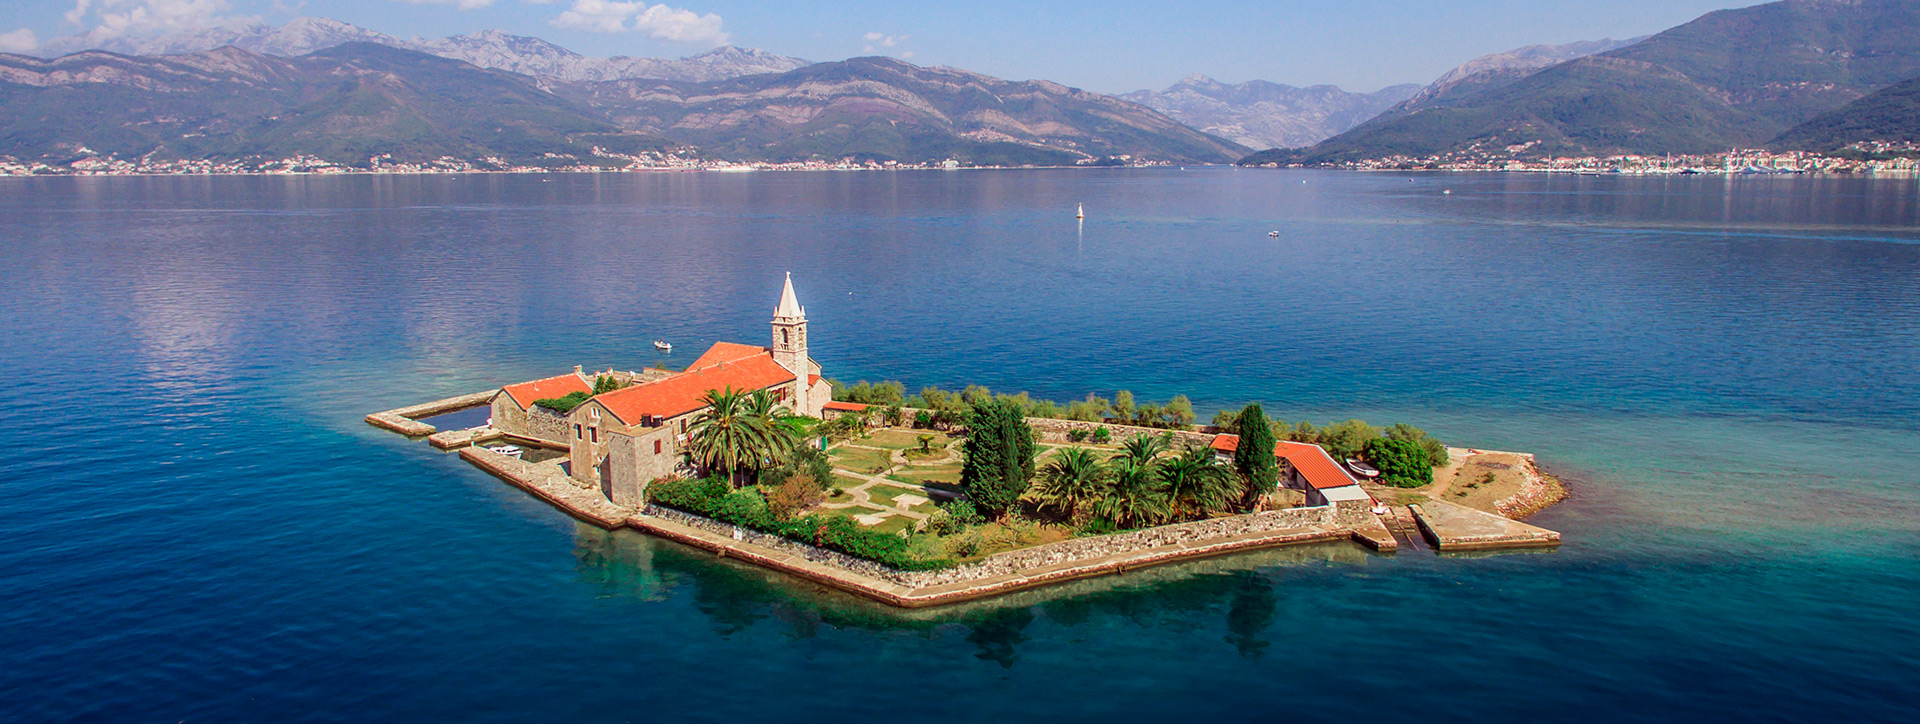 Island of Our Lady of Mercy from a height, Tivat Bay, Montenegro - Adriatic sailing routes of SimpleSai